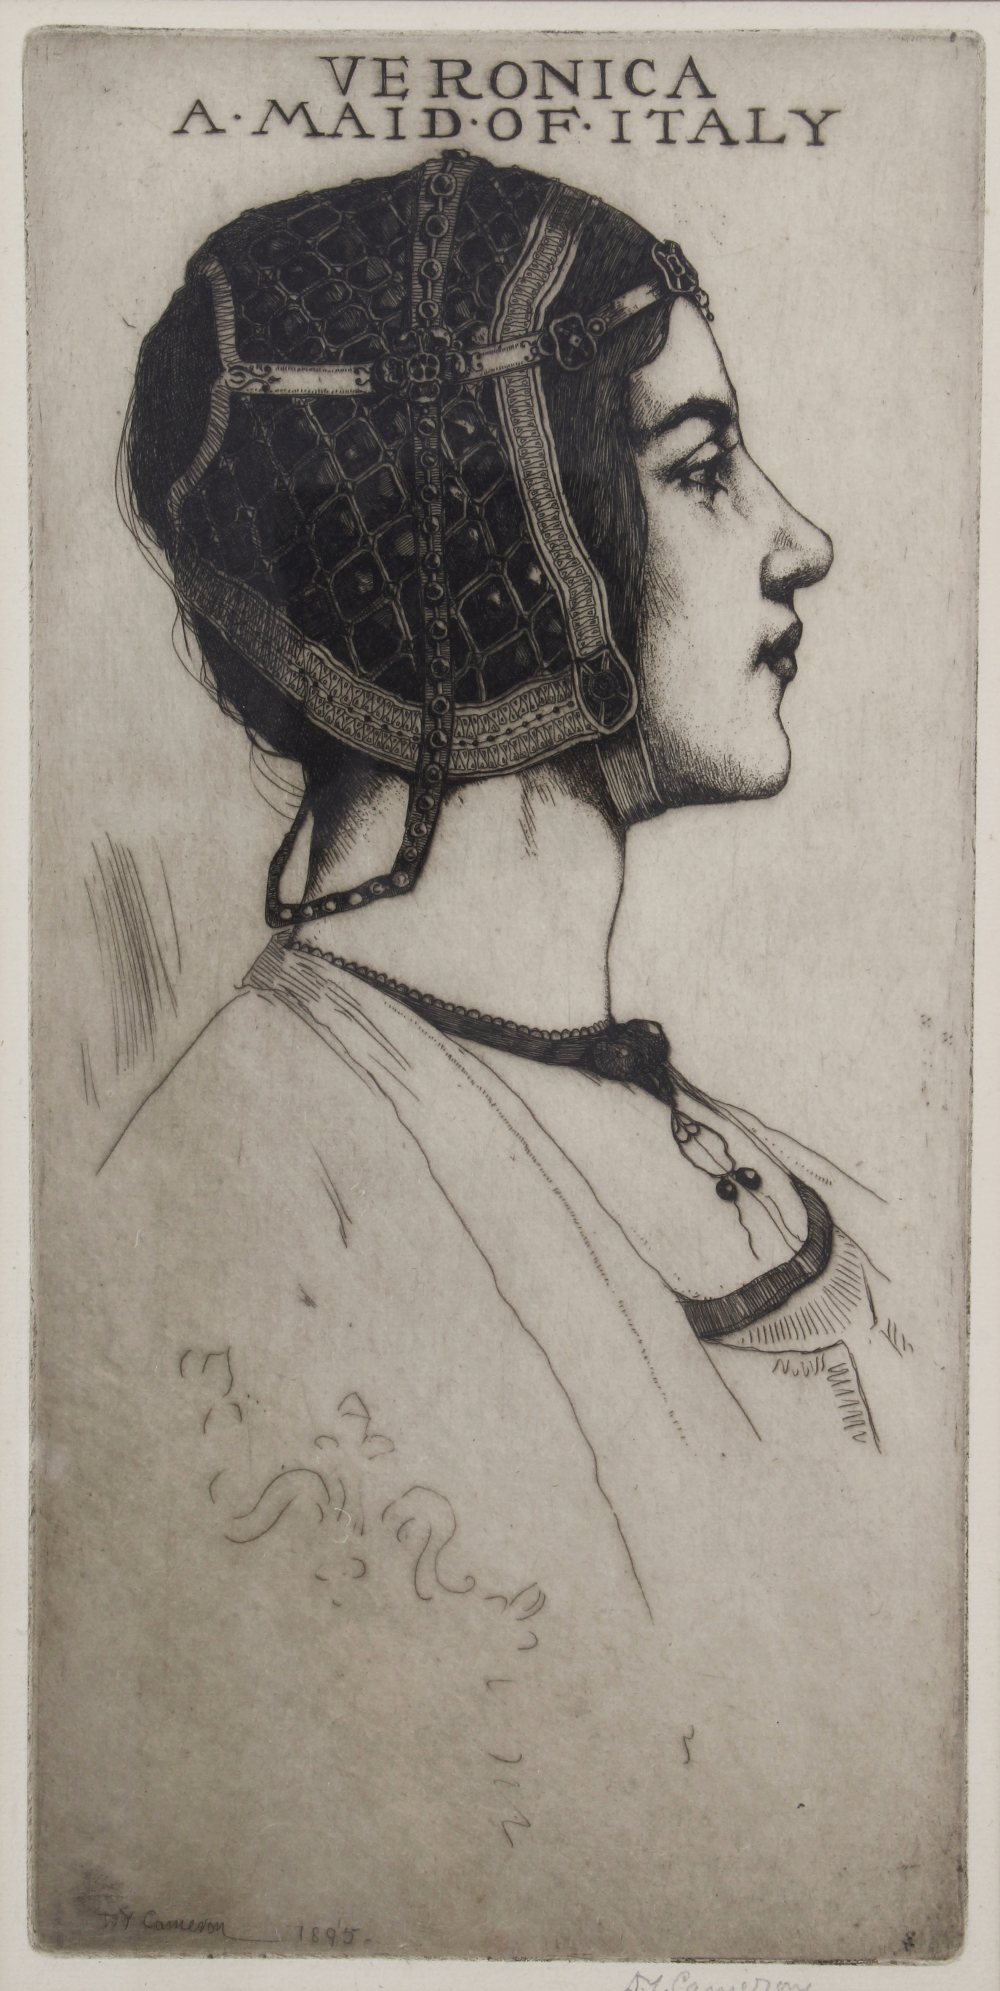 SIR DAVID YOUNG CAMERON (SCOTTISH 1865-1945) VERONICA, A MAID OF ITALY, etching, signed and dated in